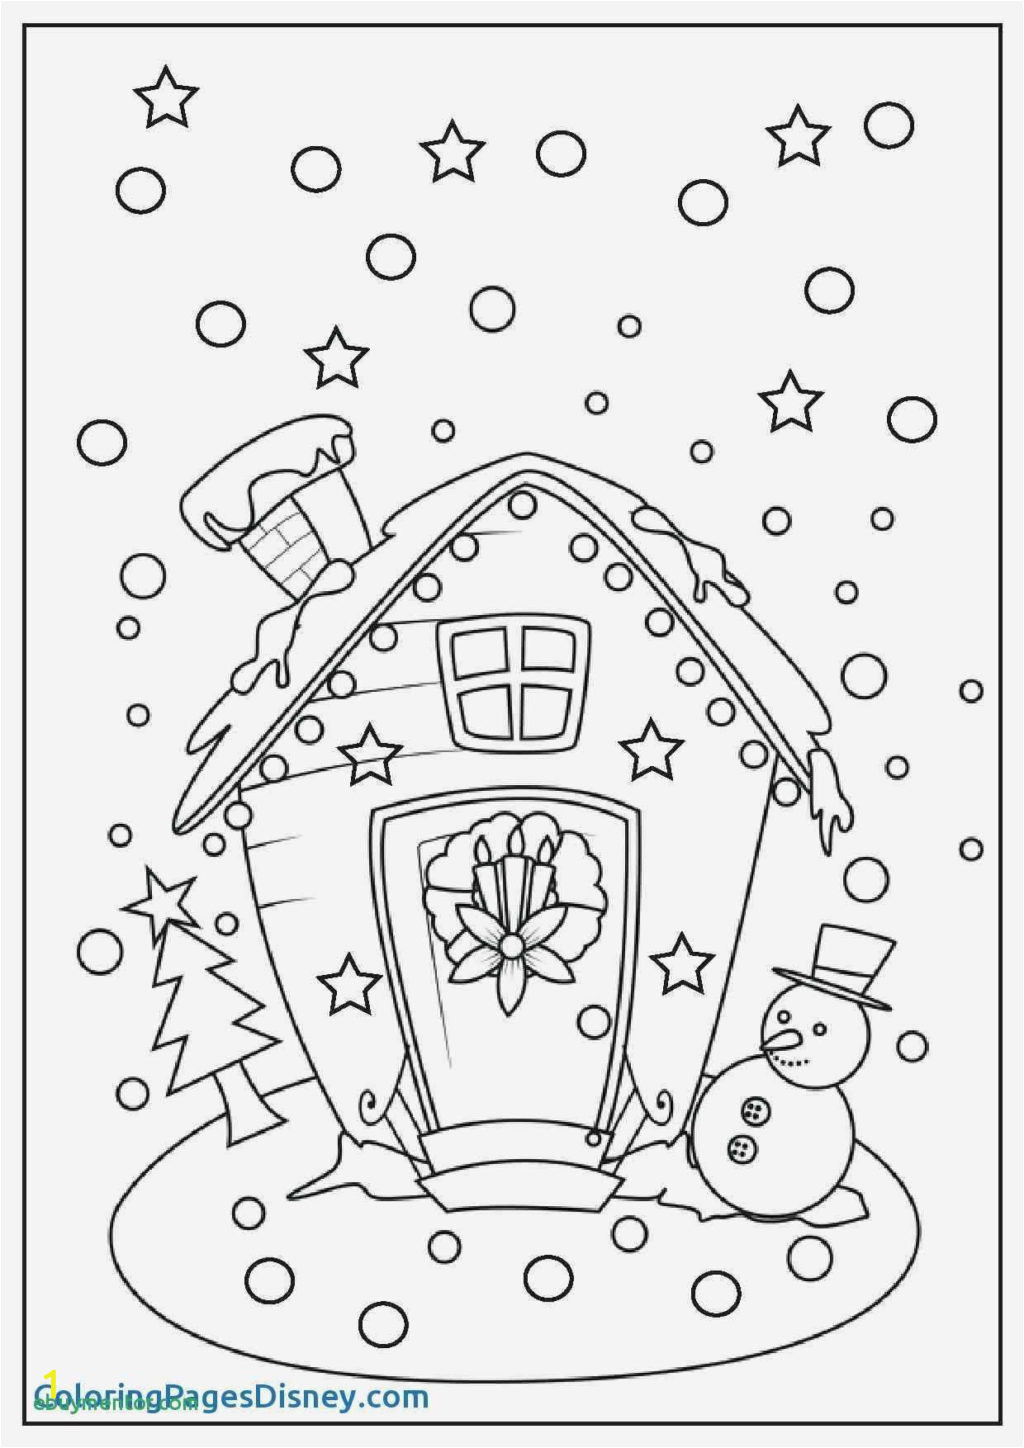 Spy Coloring Pages for Kids Coloring Book Tremendous Spiesoloring Page Image